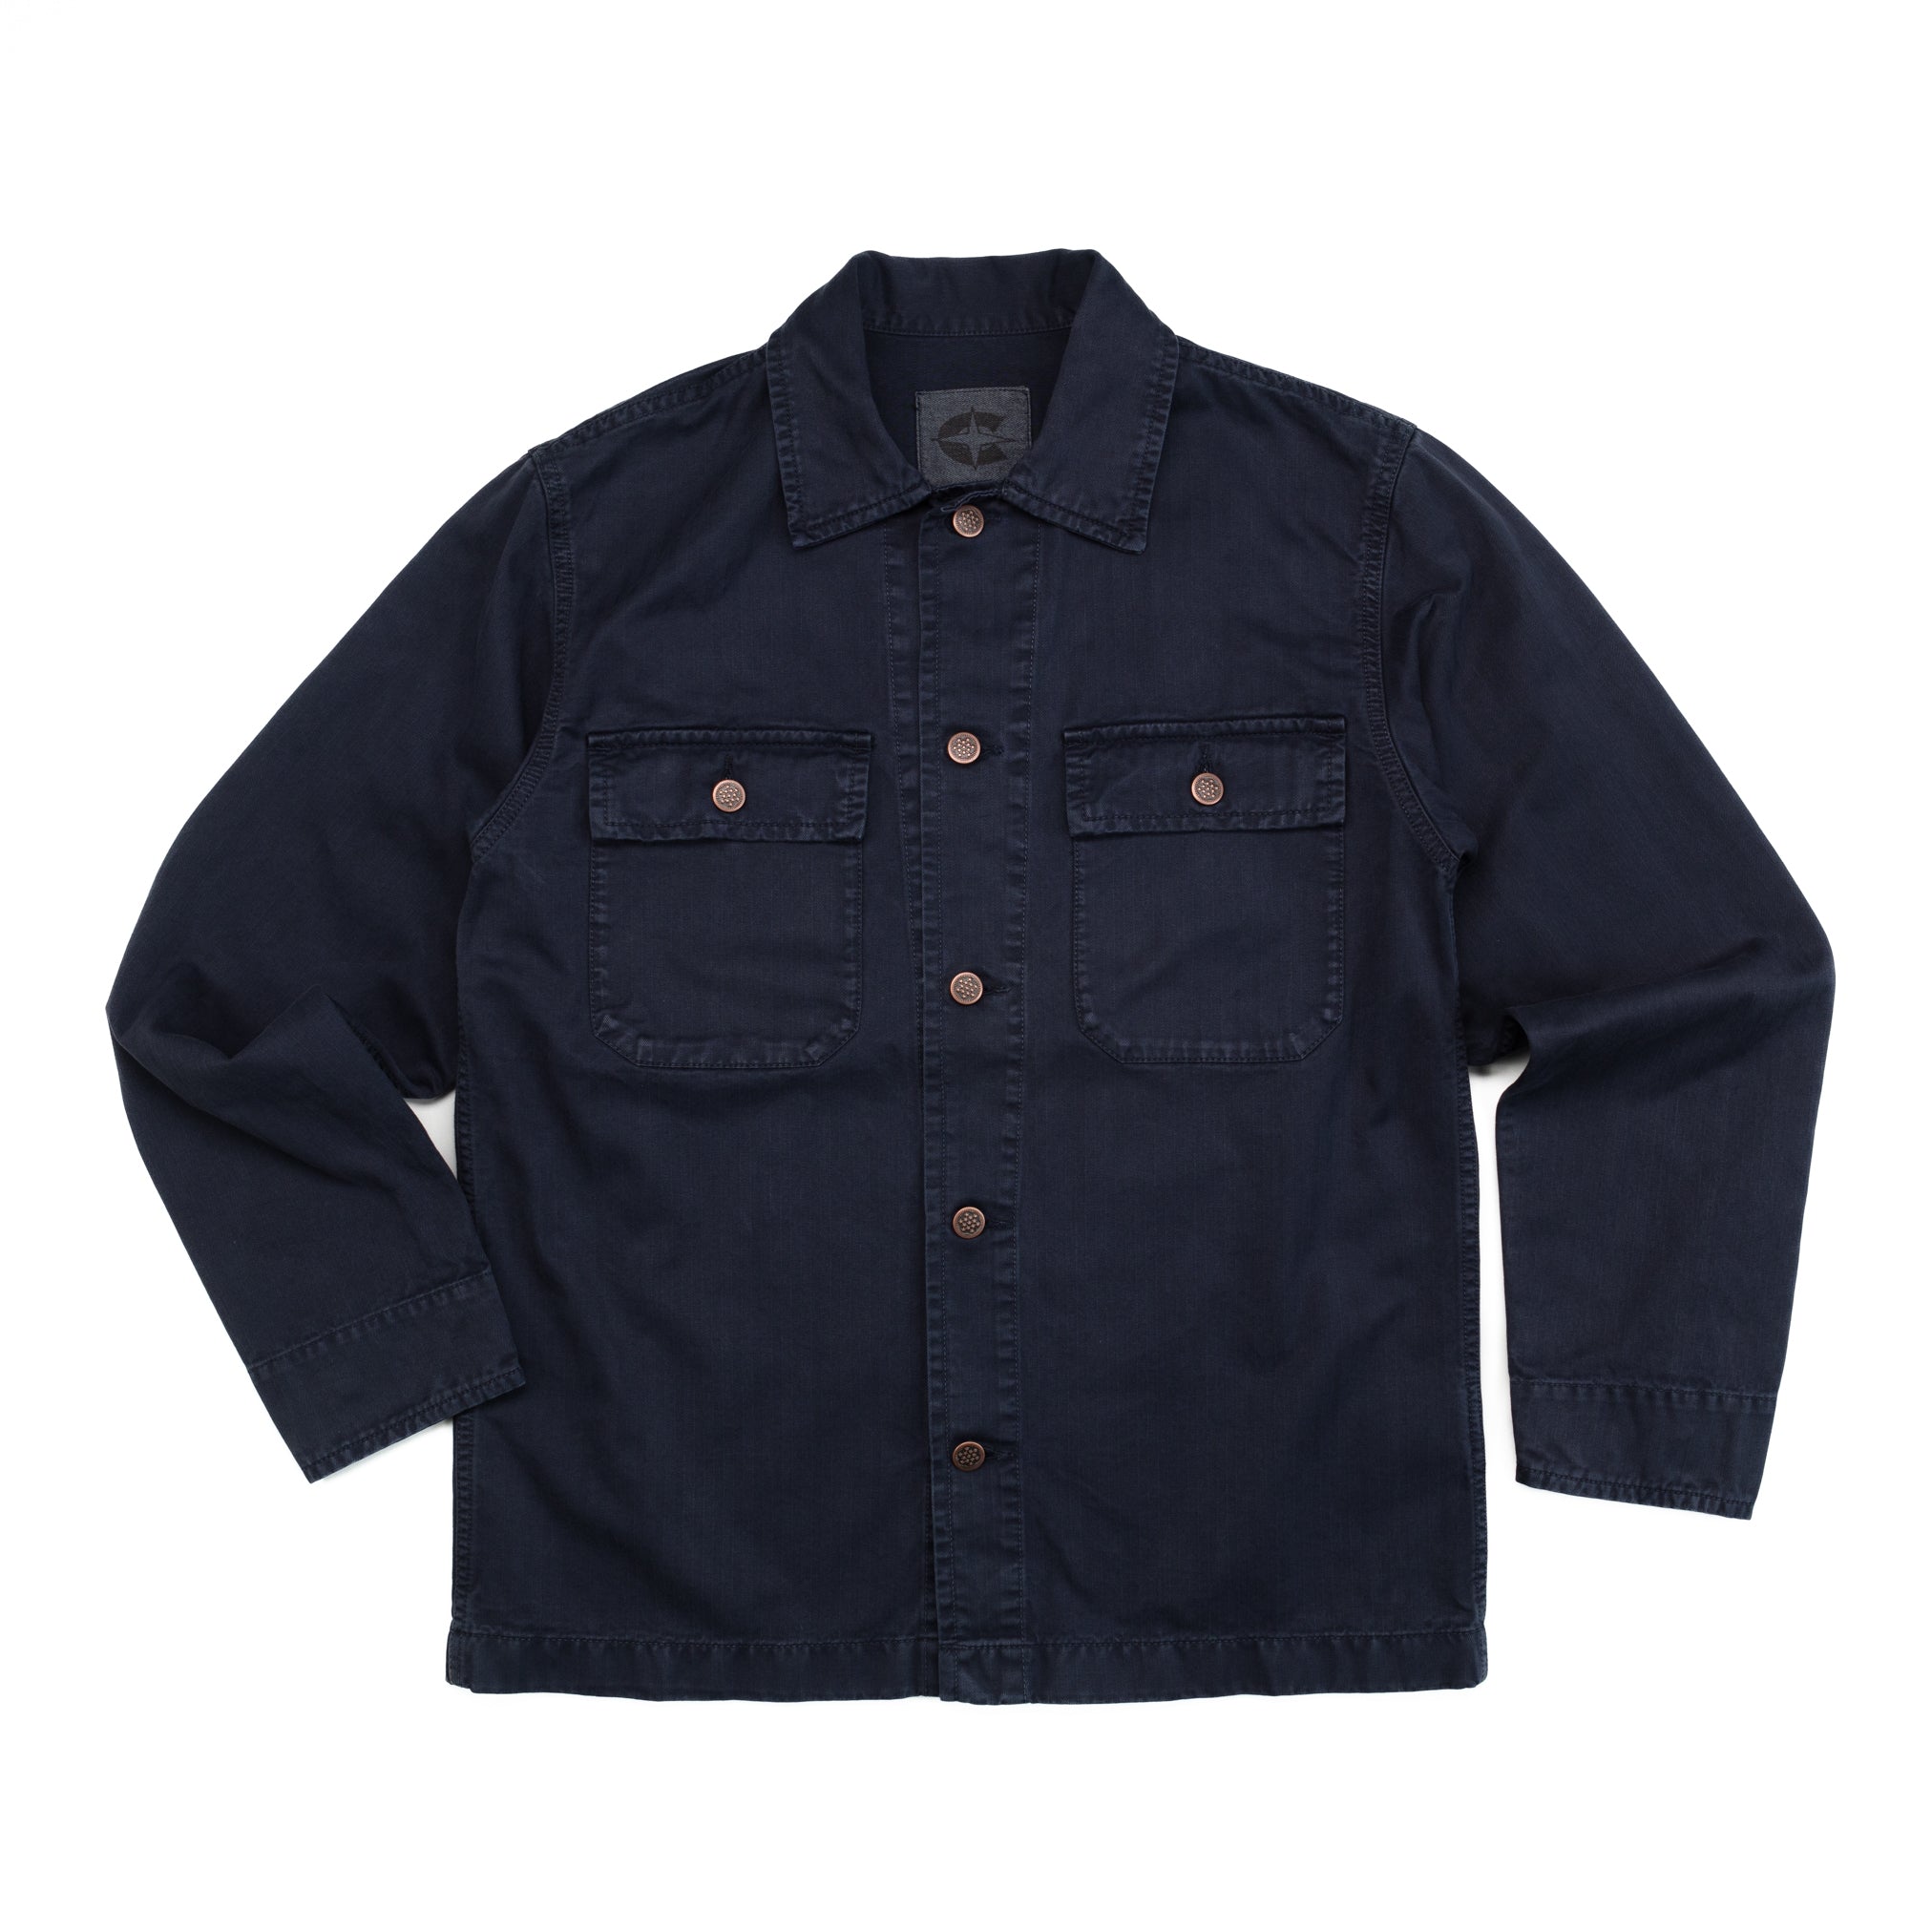 Willy's Field Shirt in Navy HBT